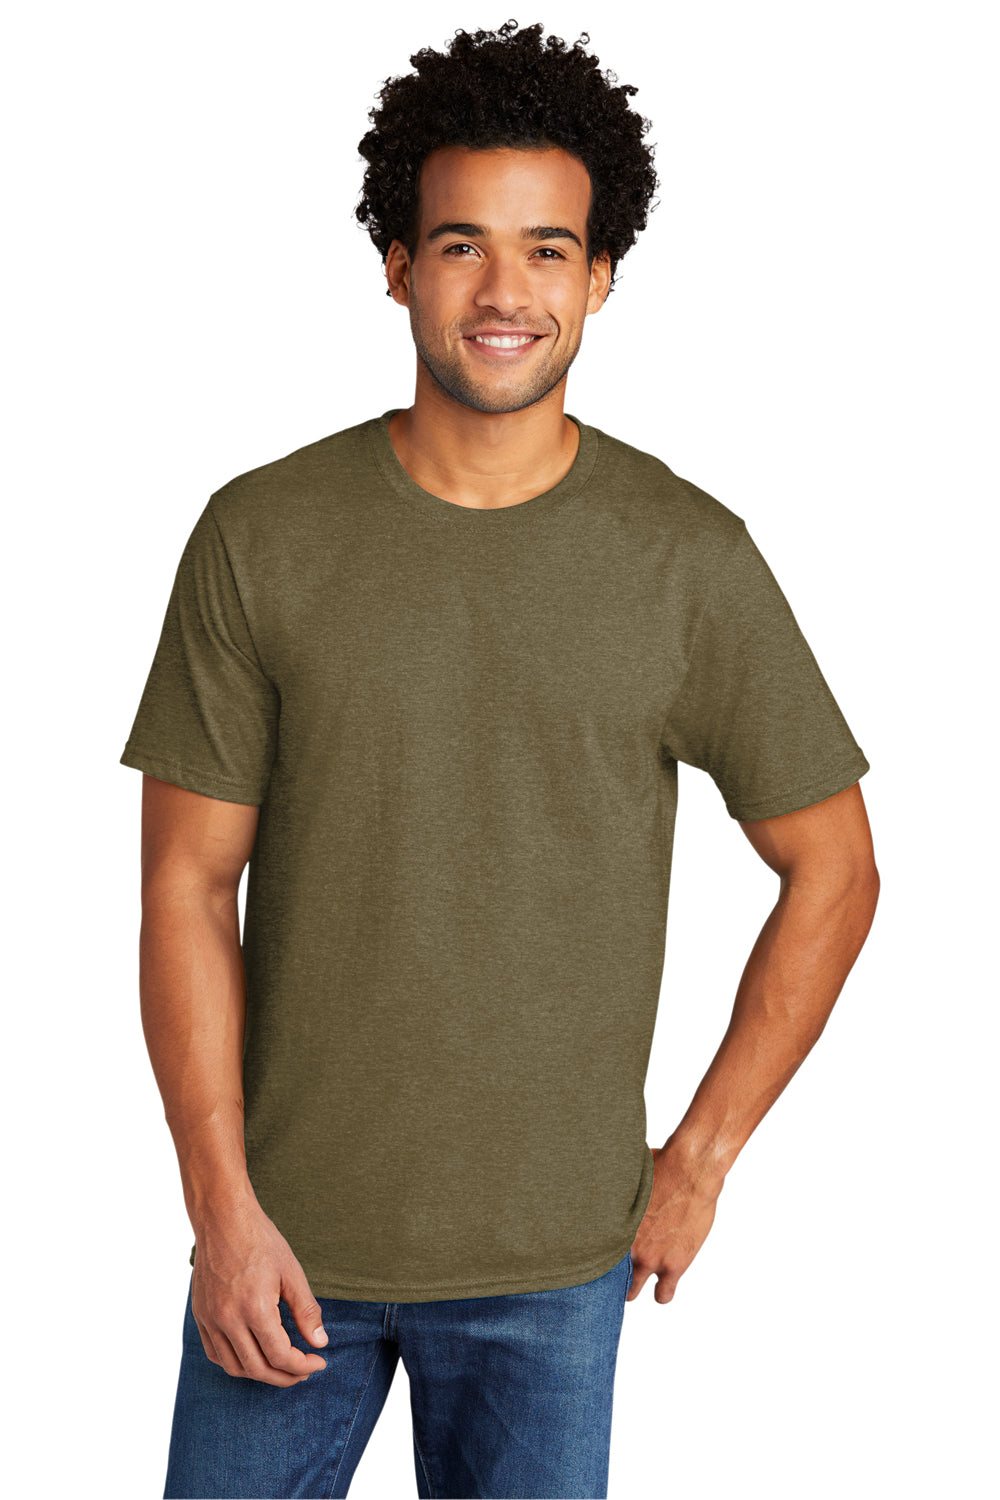 Port & Company Mens Short Sleeve Crewneck T-Shirt Heather Coyote Brown Front